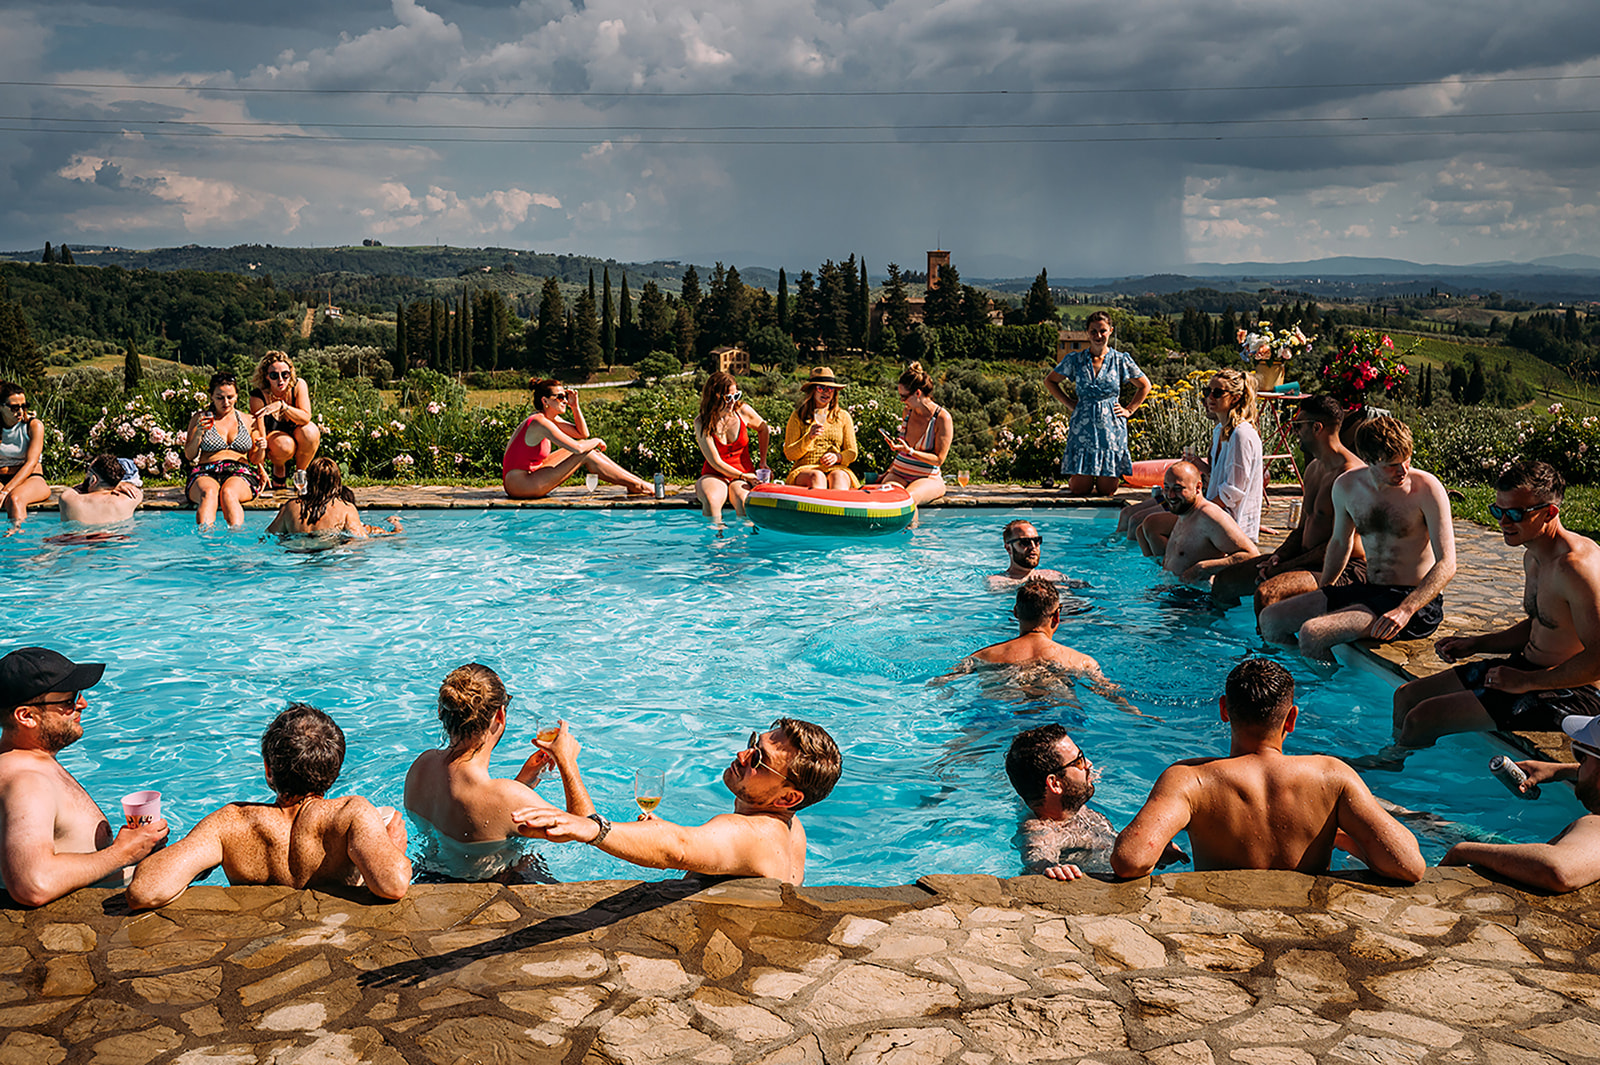 A pool party in Italy